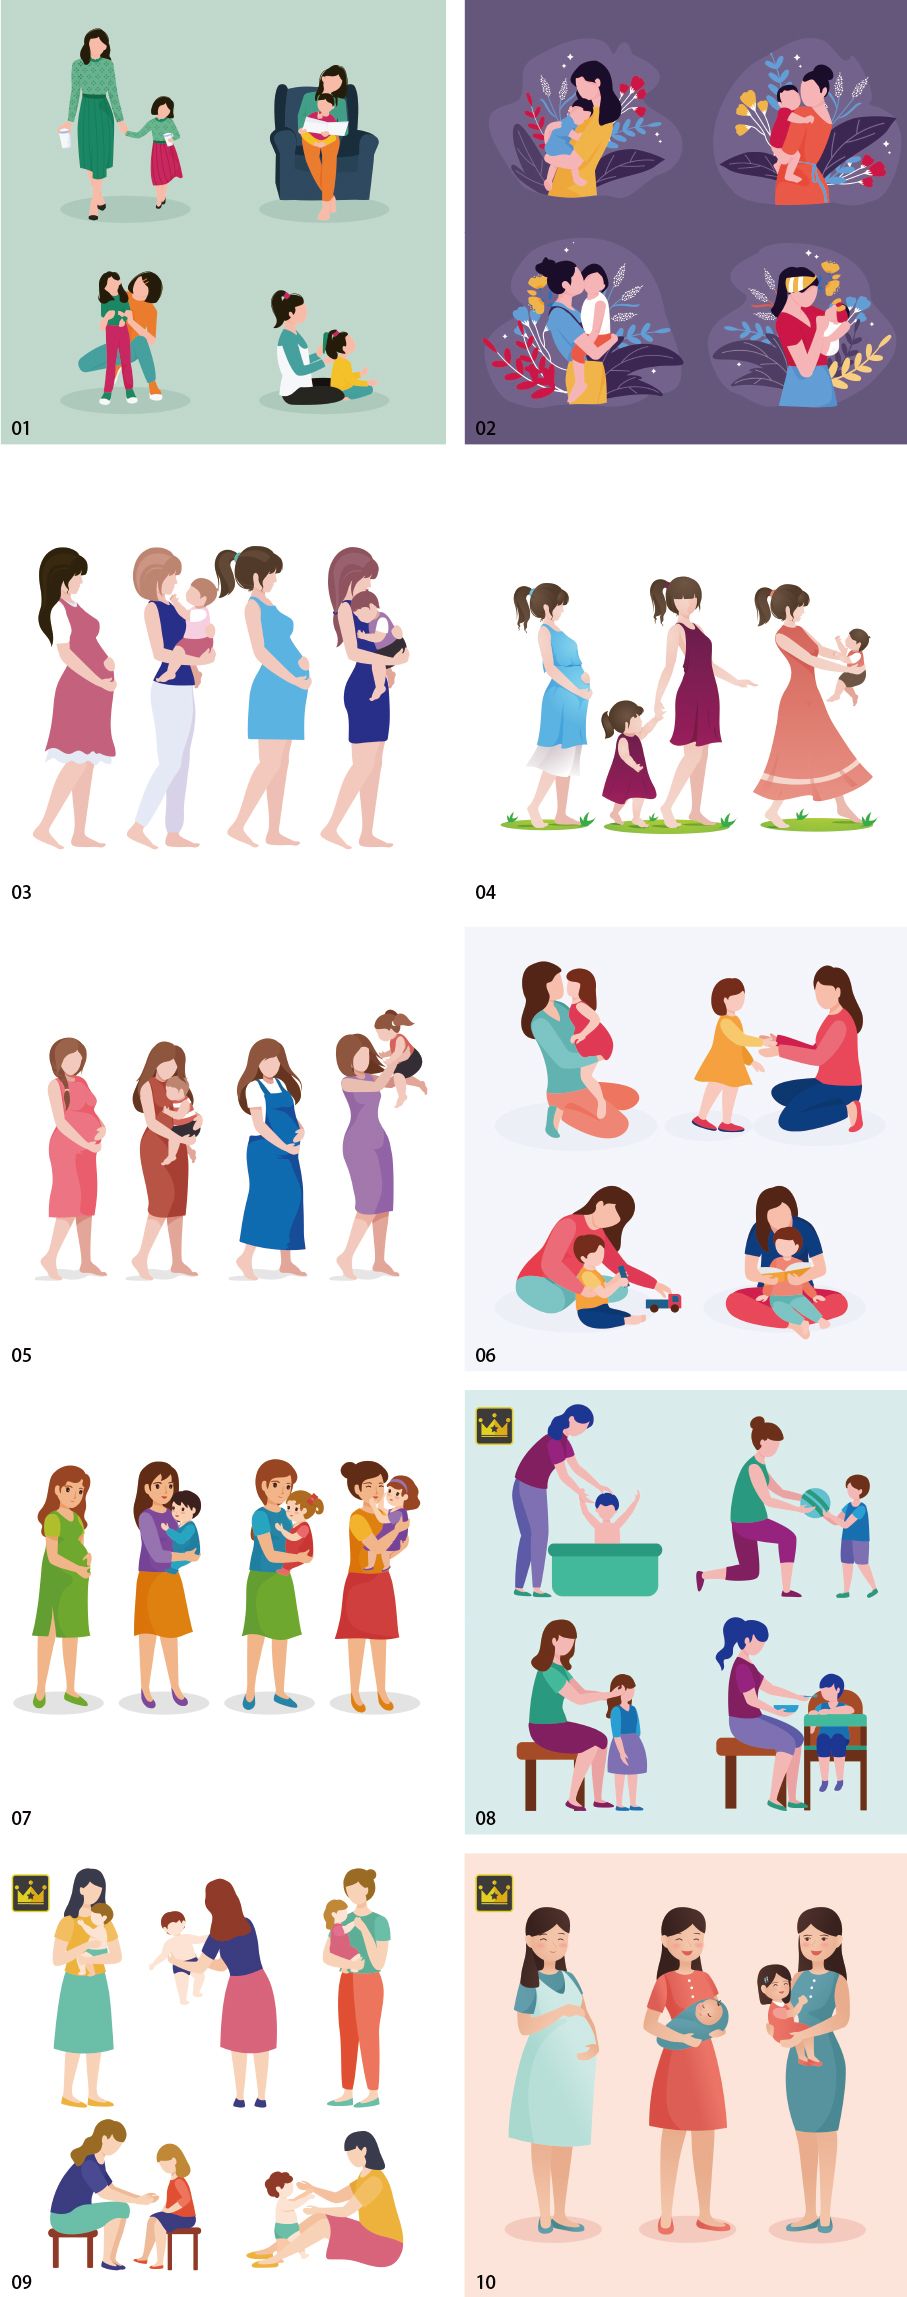 Mothers day illustration collection